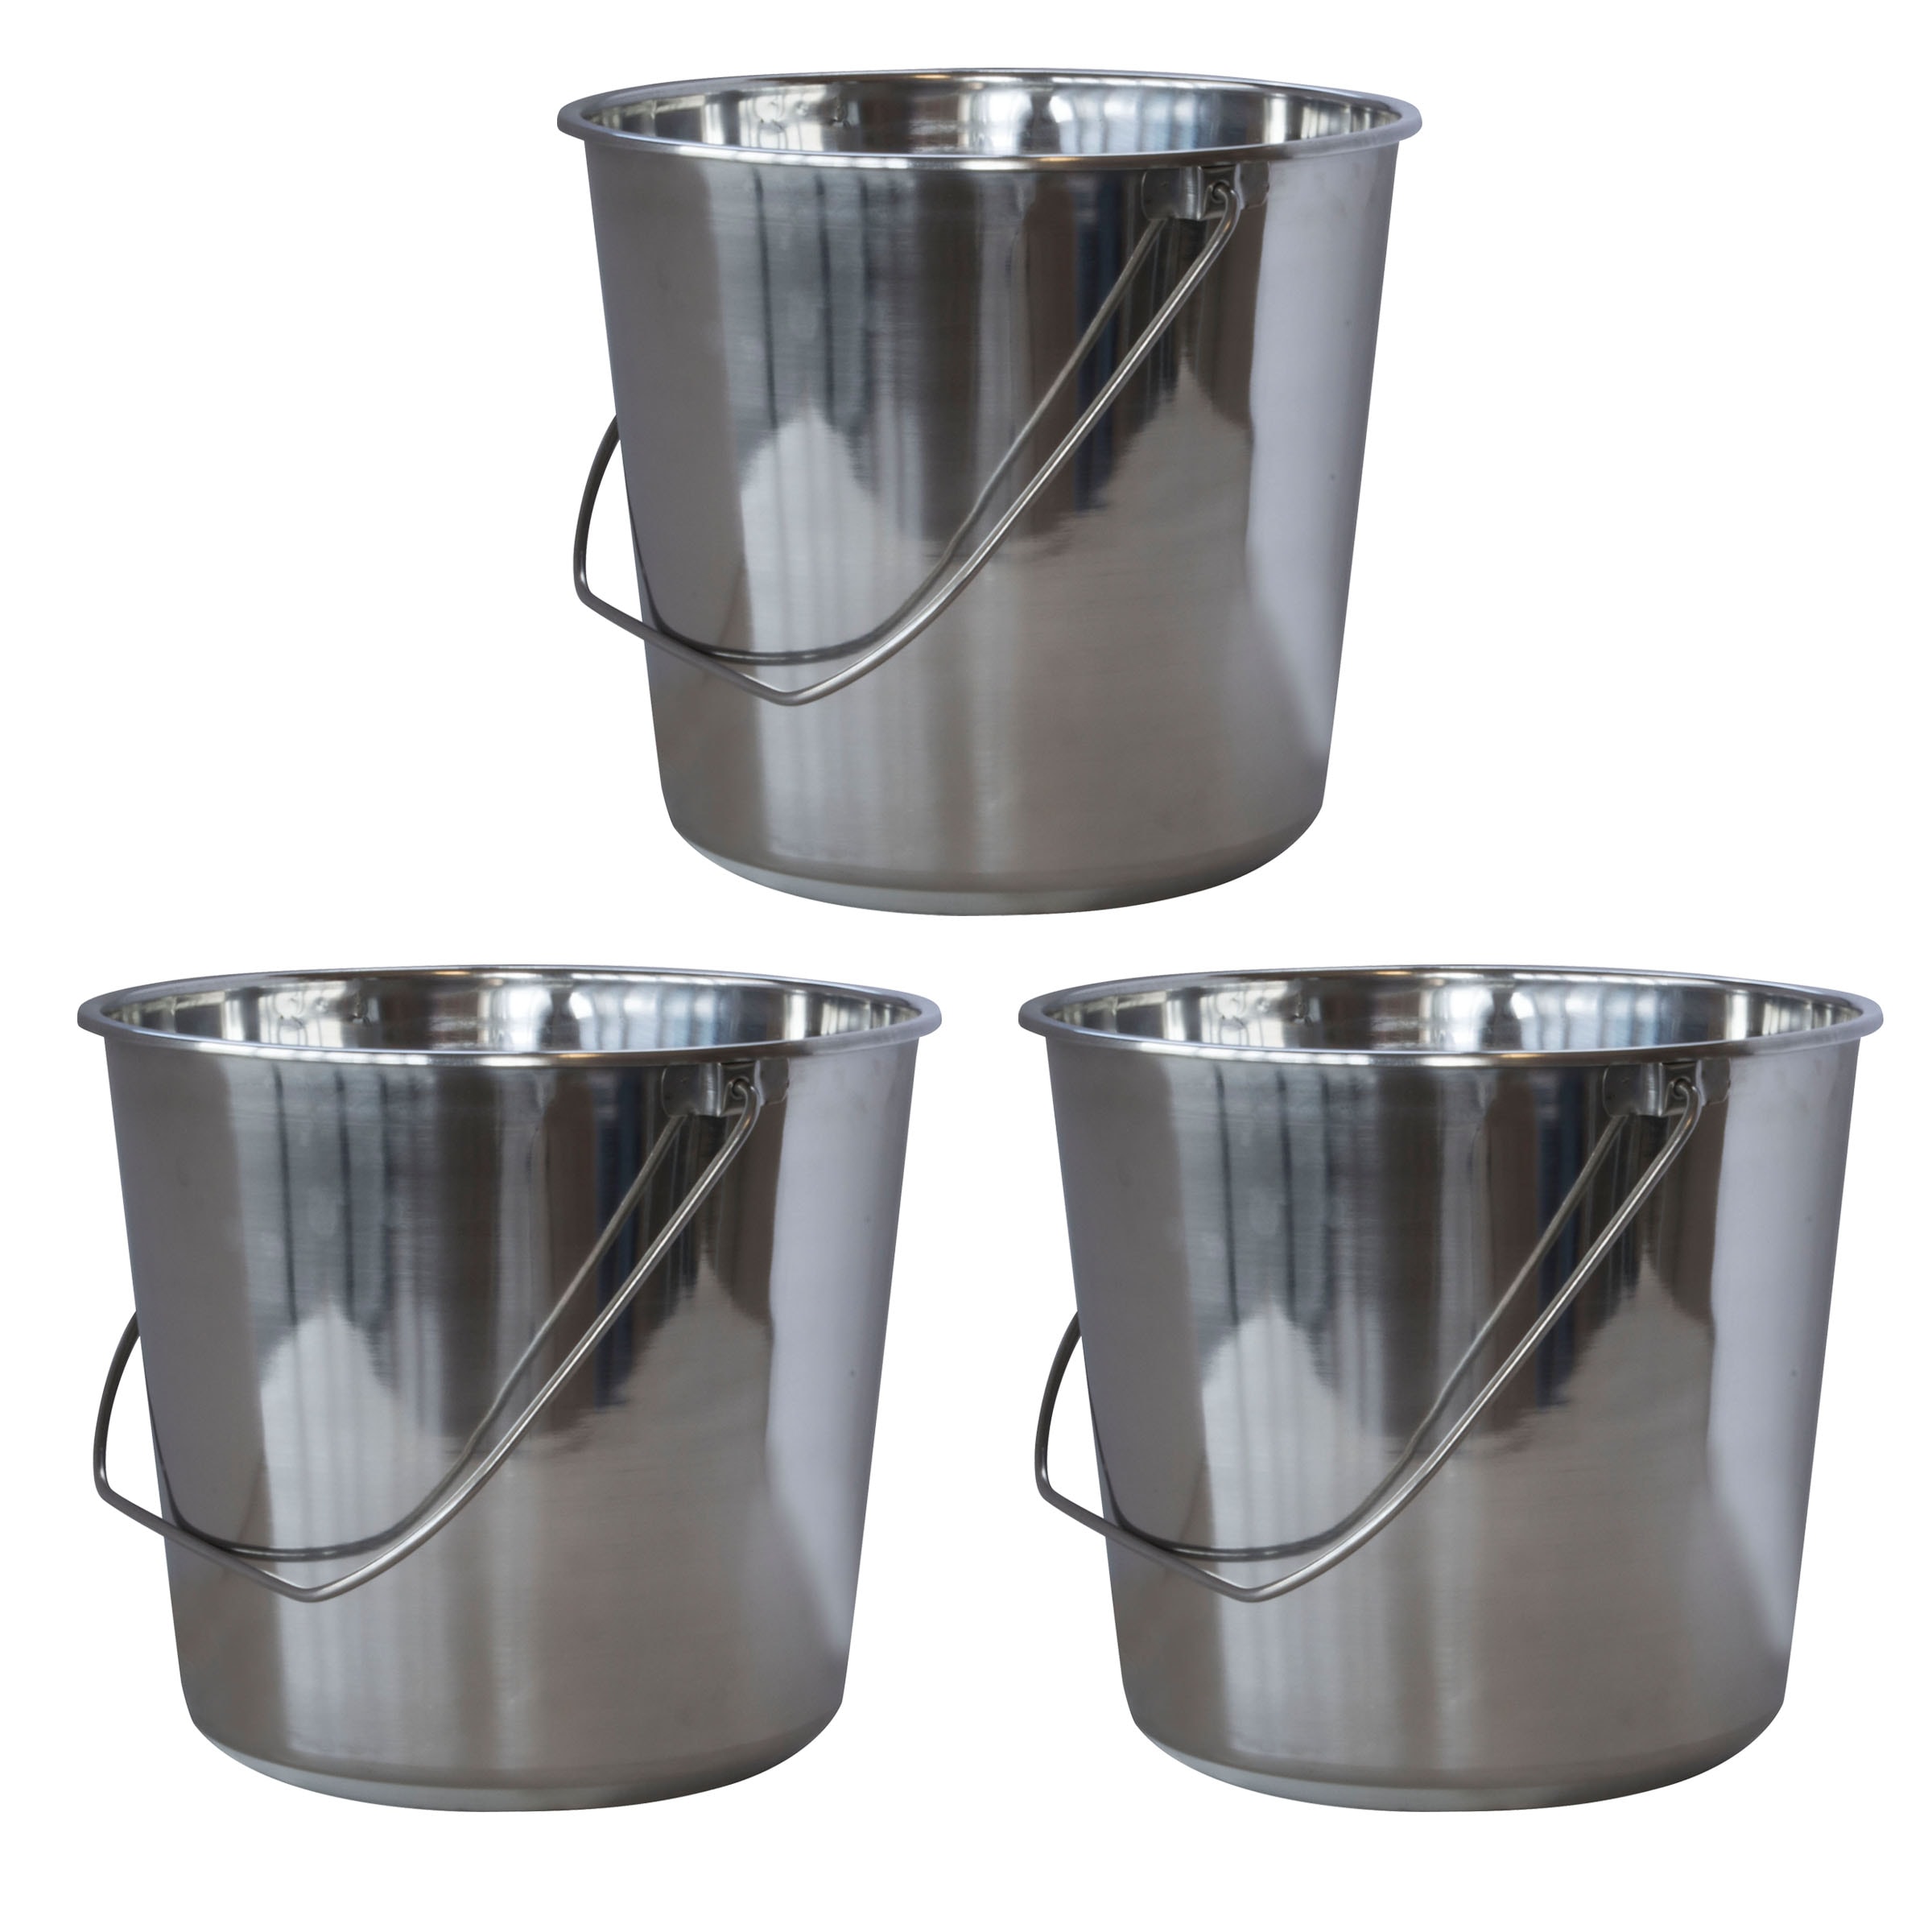 0.6-Gallon (S) Stainless Steel General Bucket (3-Pack)